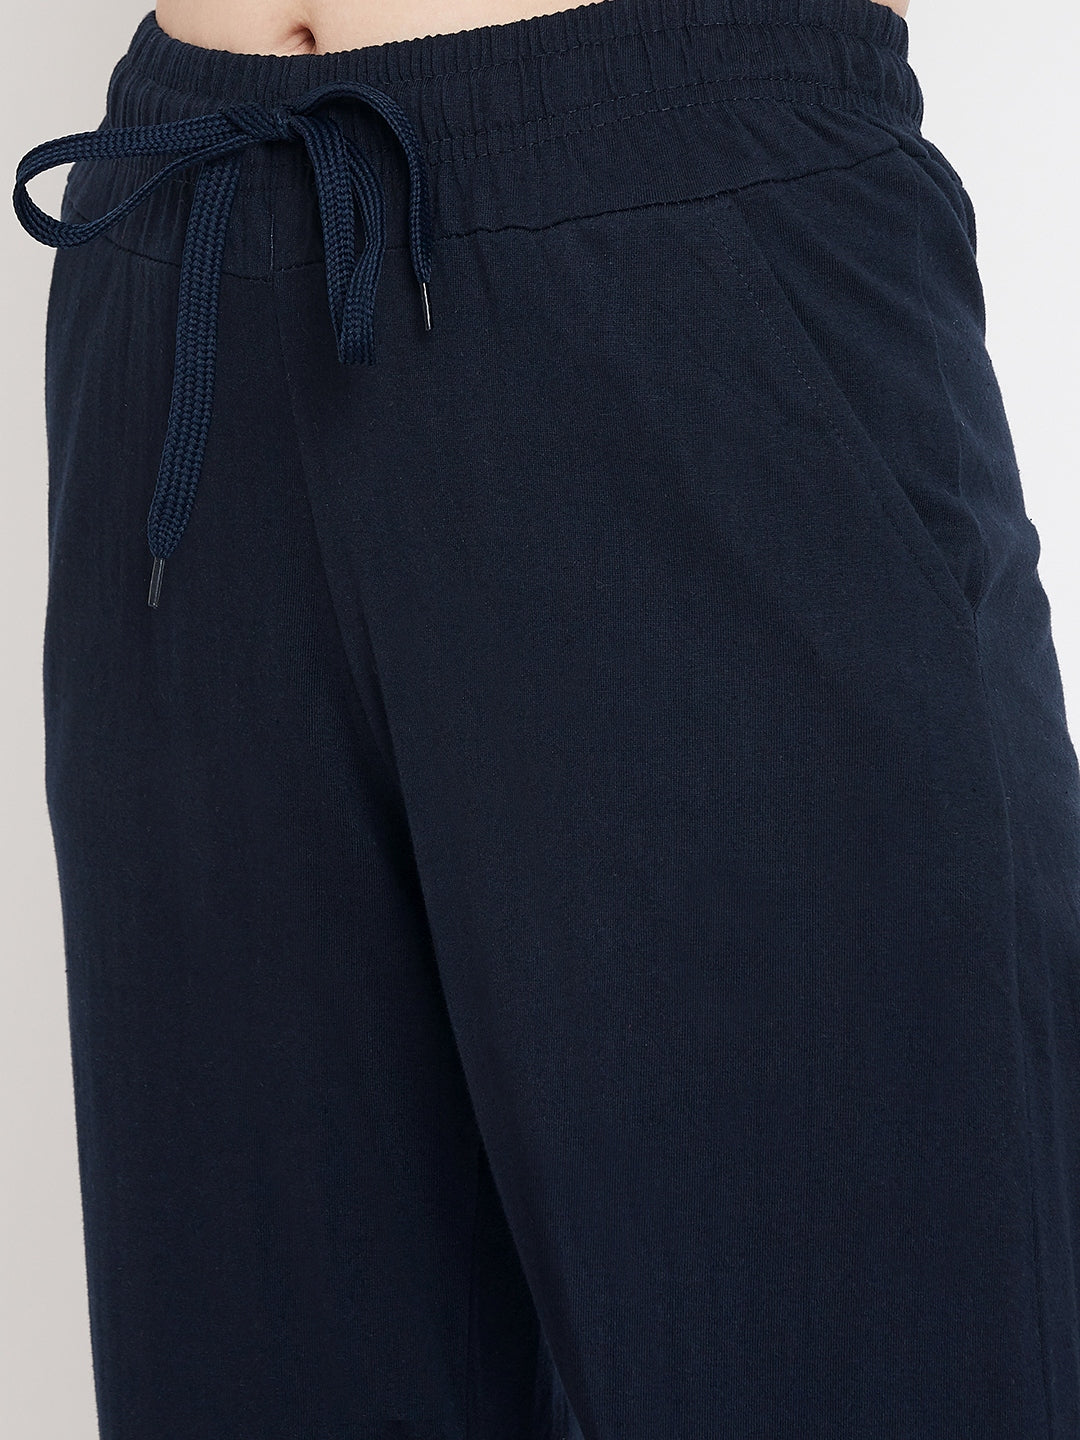 Women's Pack of 2 Track Pants-Navy and Light Grey